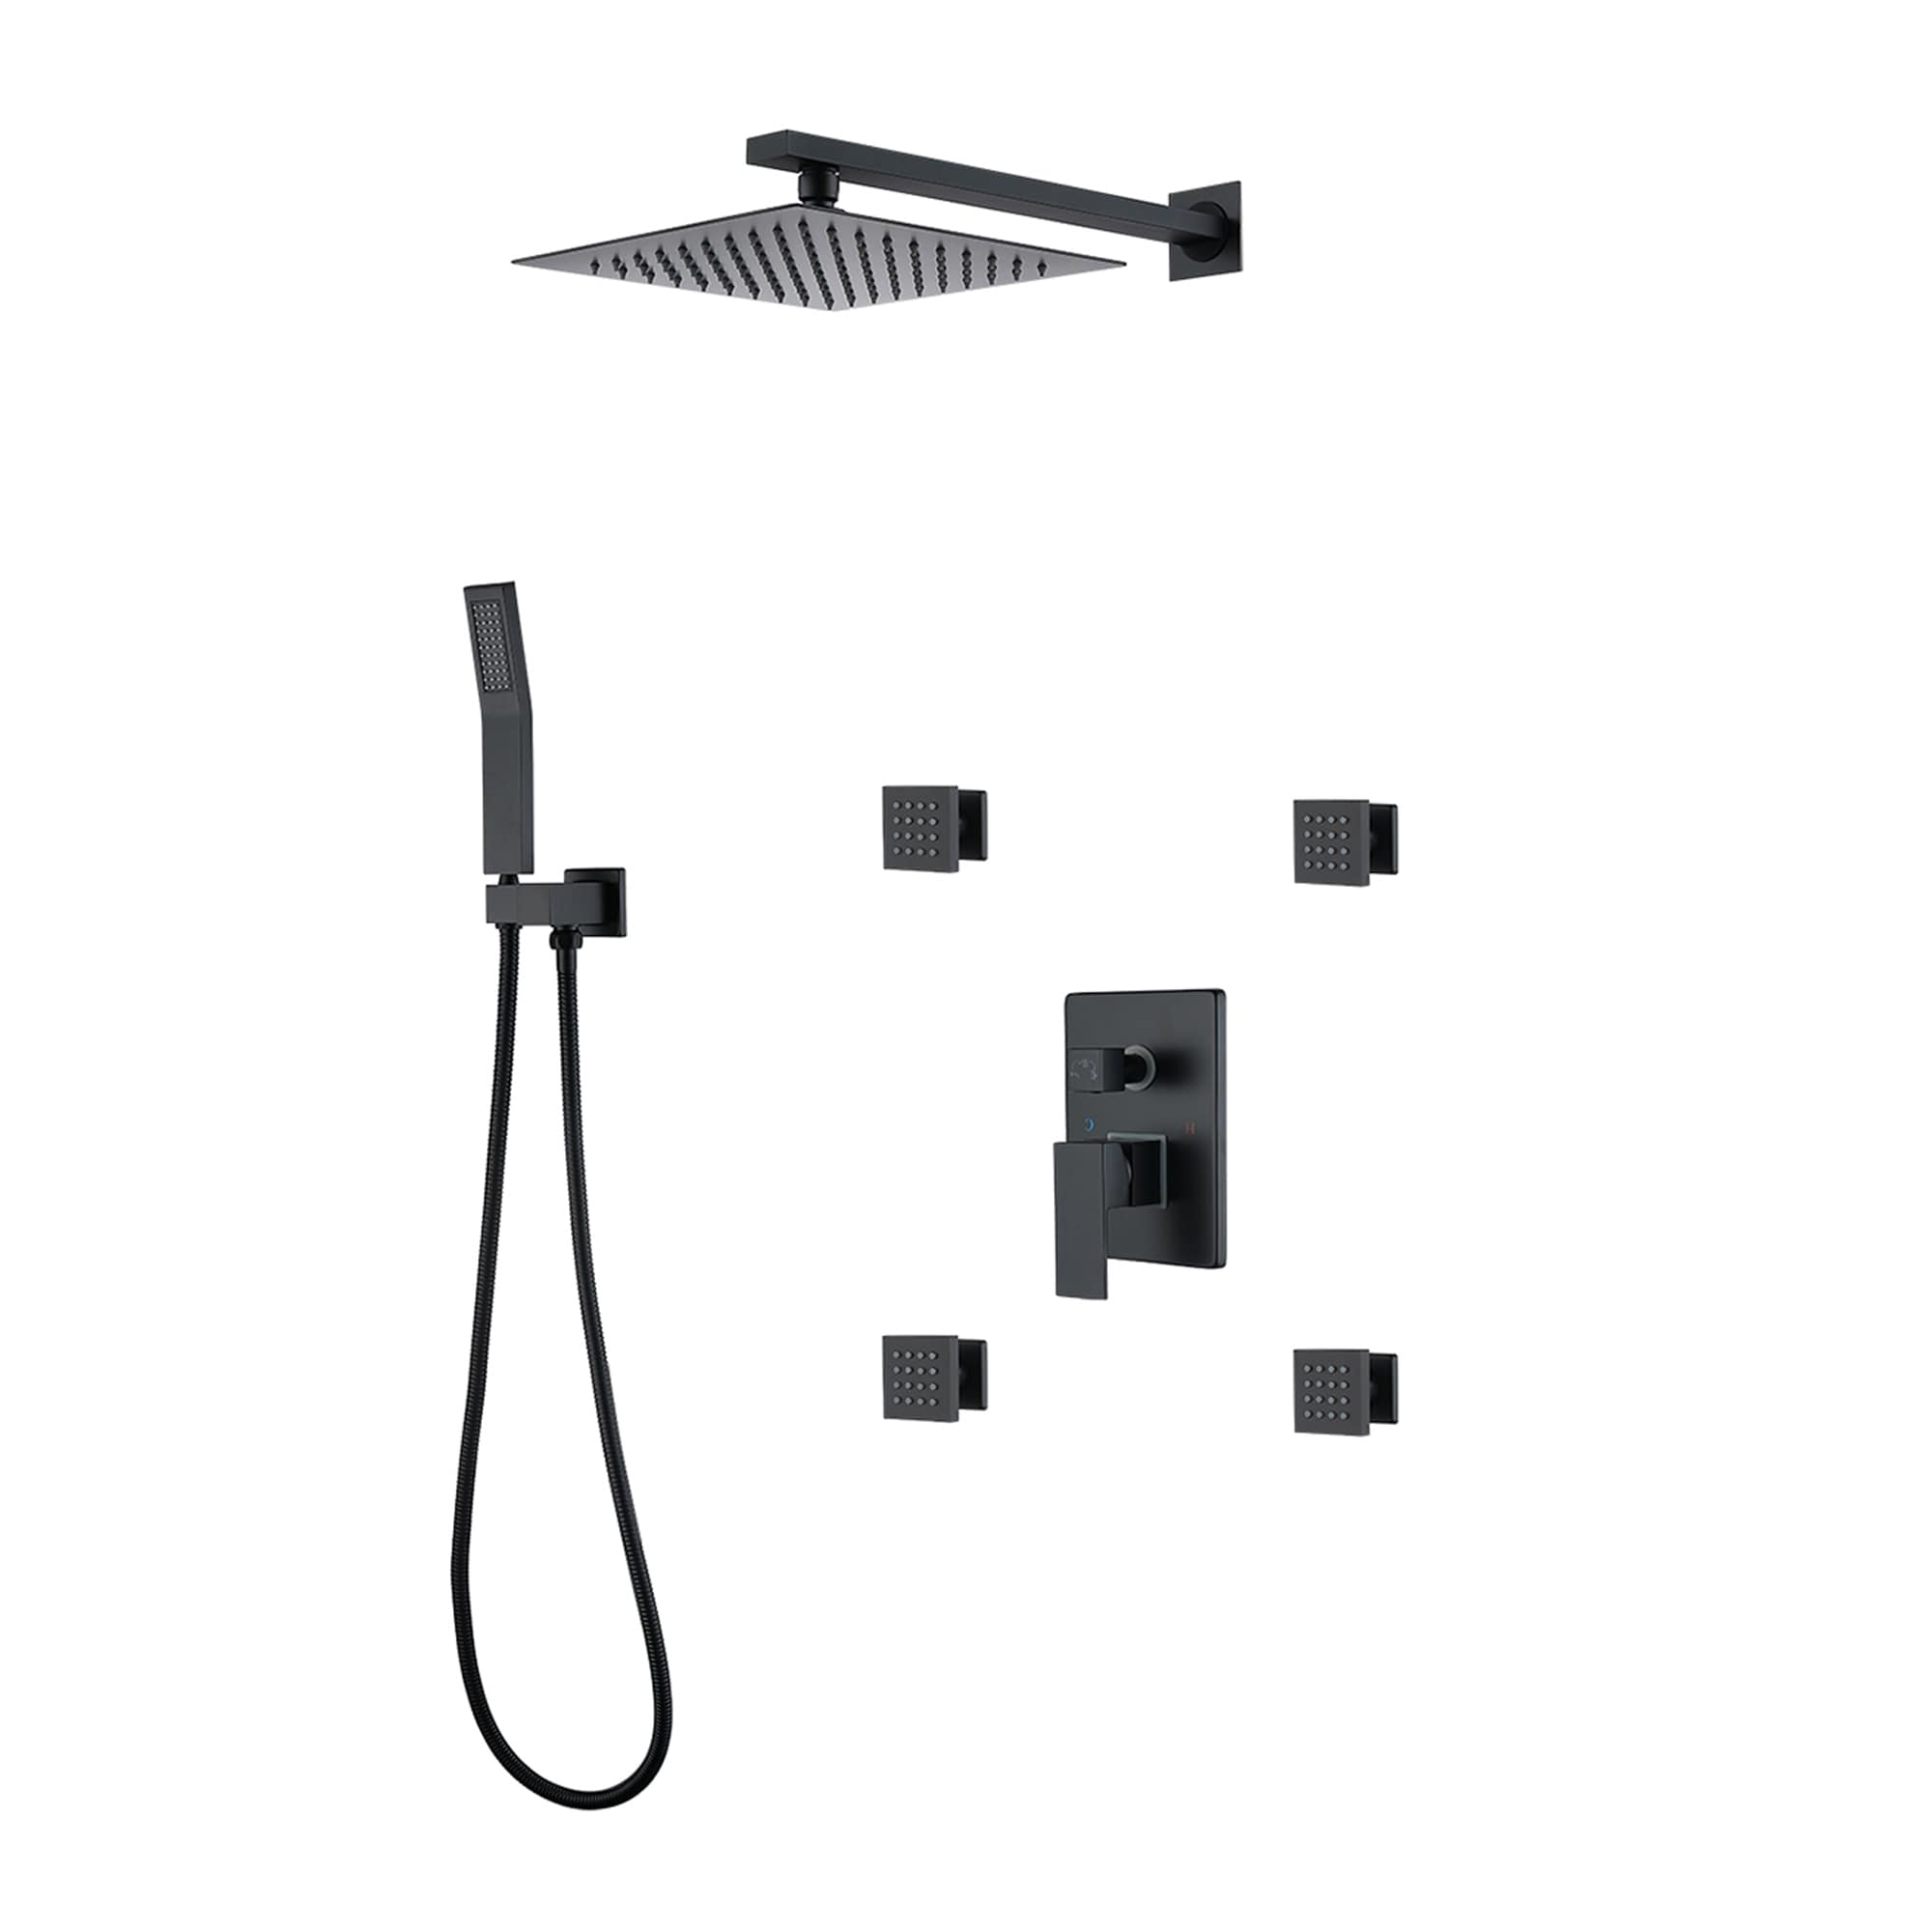 WELLFOR ZC Matte Black Dual Head Waterfall Built-In Shower Faucet System with 3-way Diverter Pressure-balanced Valve Included